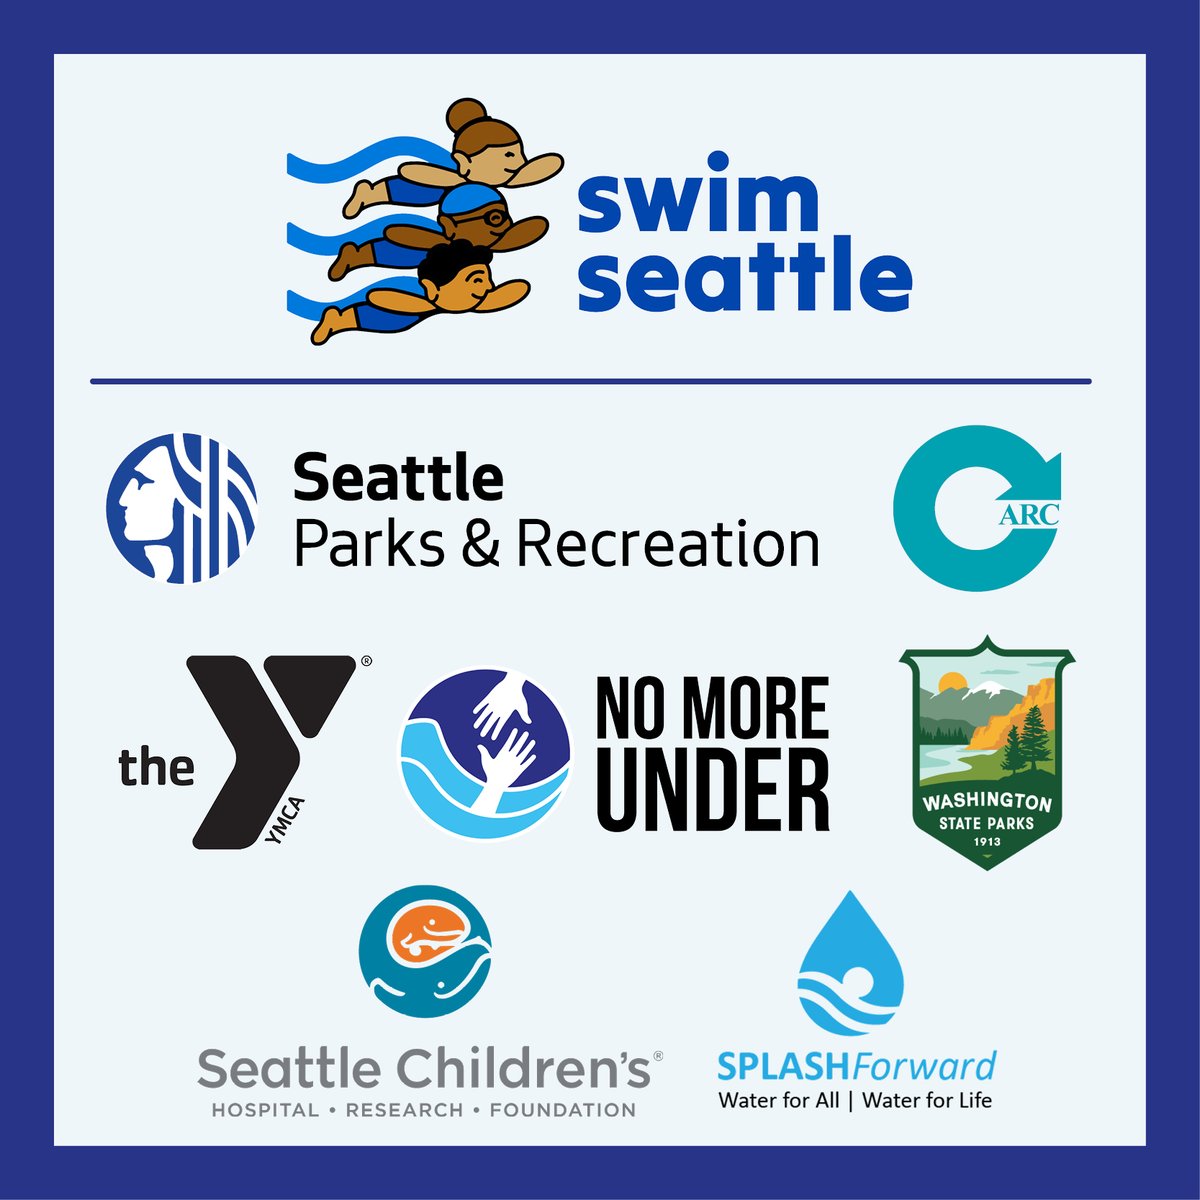 Join us for a day of FREE fun and activities centered around water safety!

Saturday, May 18 from 11am to 3pm at Rainier Beach Community Center and Pool. 

A FREE family swim is available from 12:30 to 2pm. 

#WaterSafetyDay #SwimSeattle 

brnw.ch/21wJOHP